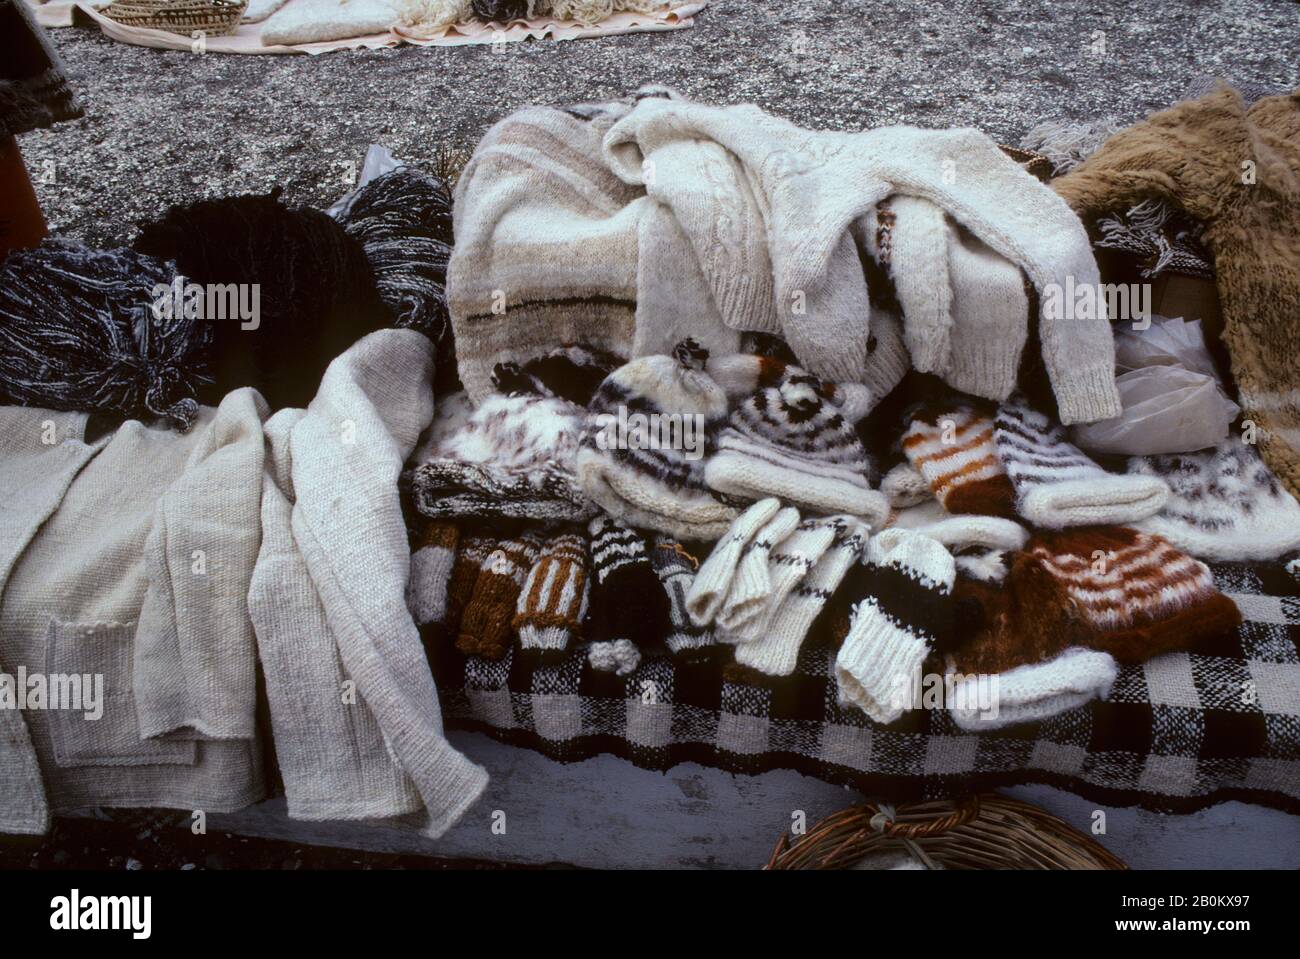 CHILE, (SOUTHERN CHILE) CHILOE ISLAND, DALCAHUE, LOCAL MARKET, HAND-MADE WOOLENS Stock Photo